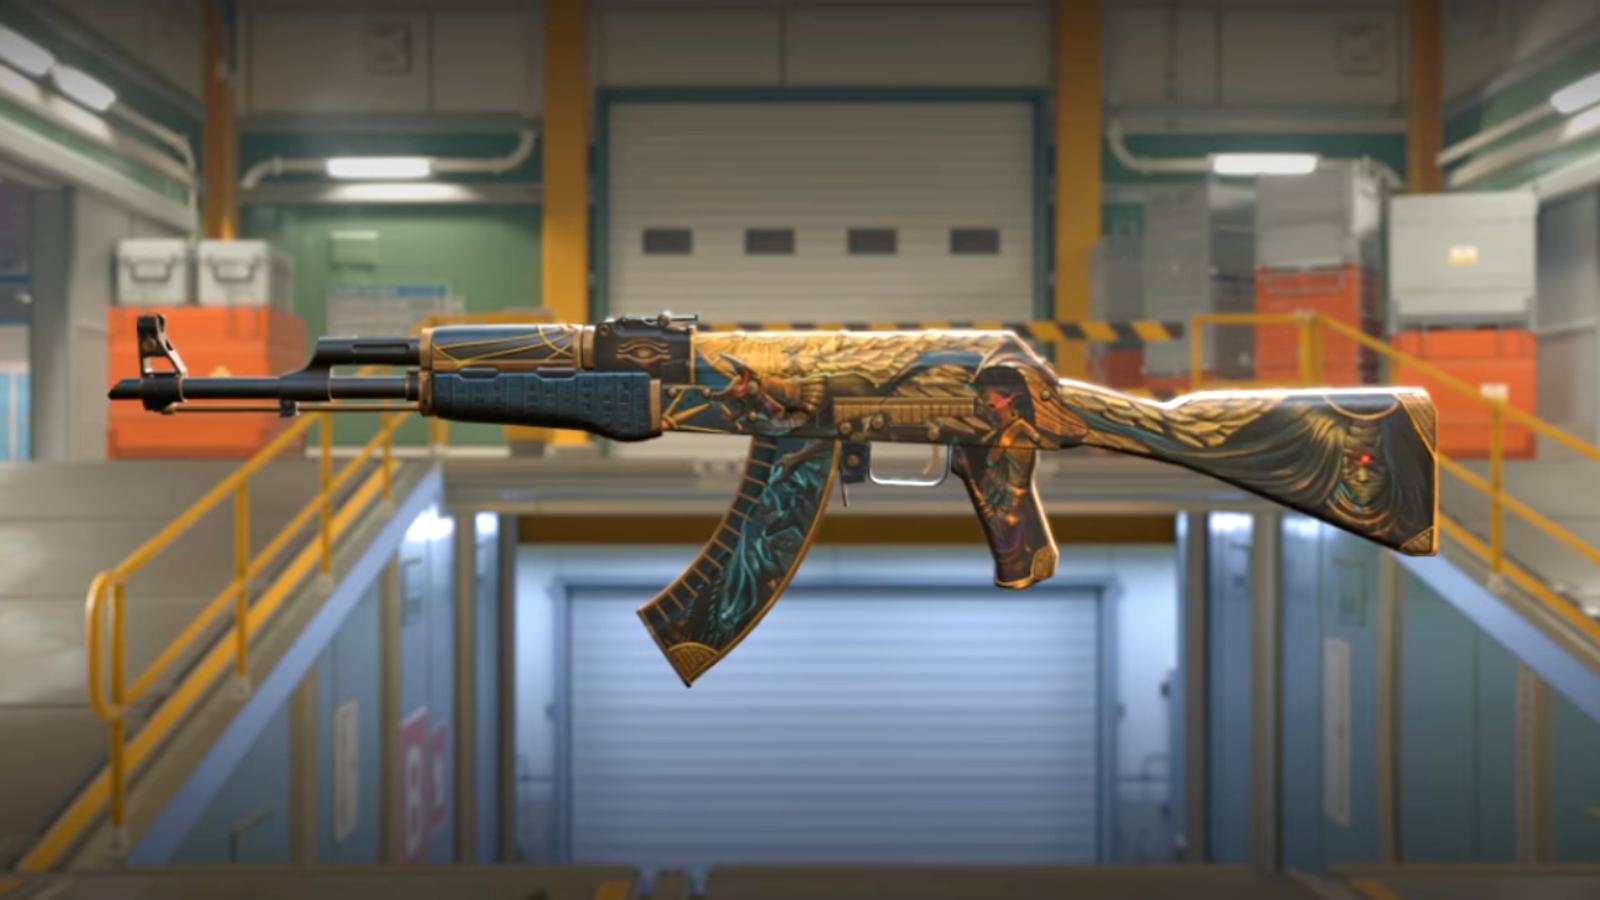 Can banned CSGO players play Counter-Strike 2? Rules revealed by